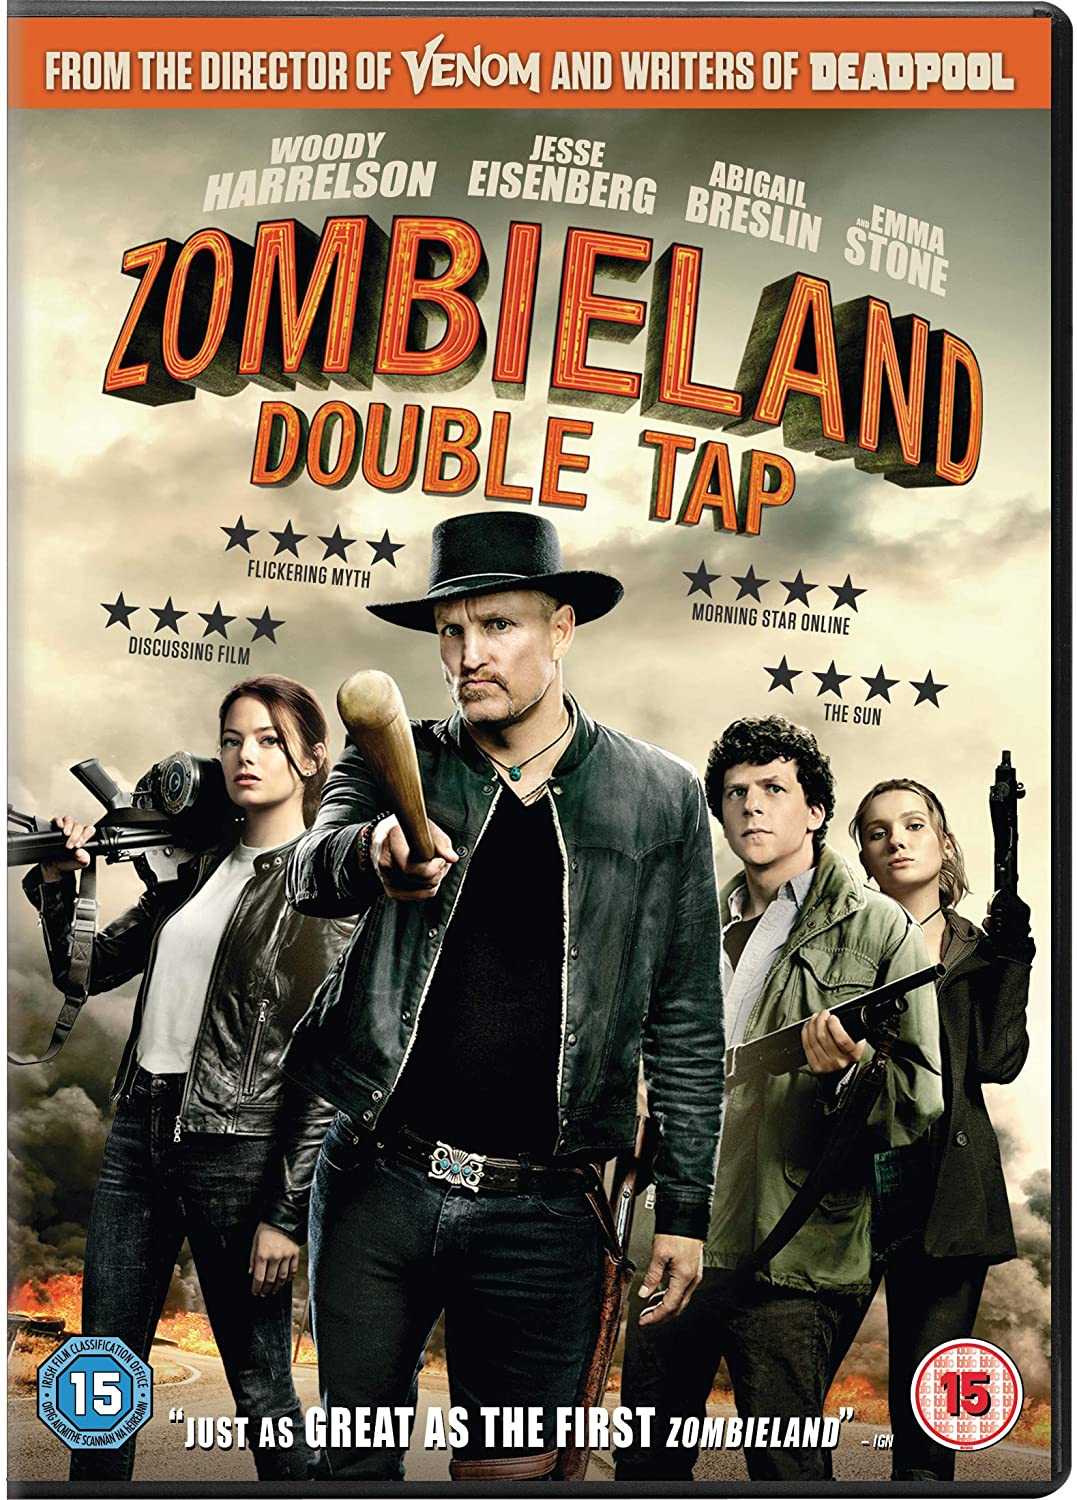 Zombieland: Double Tap [2019] – Horror/Action [DVD]